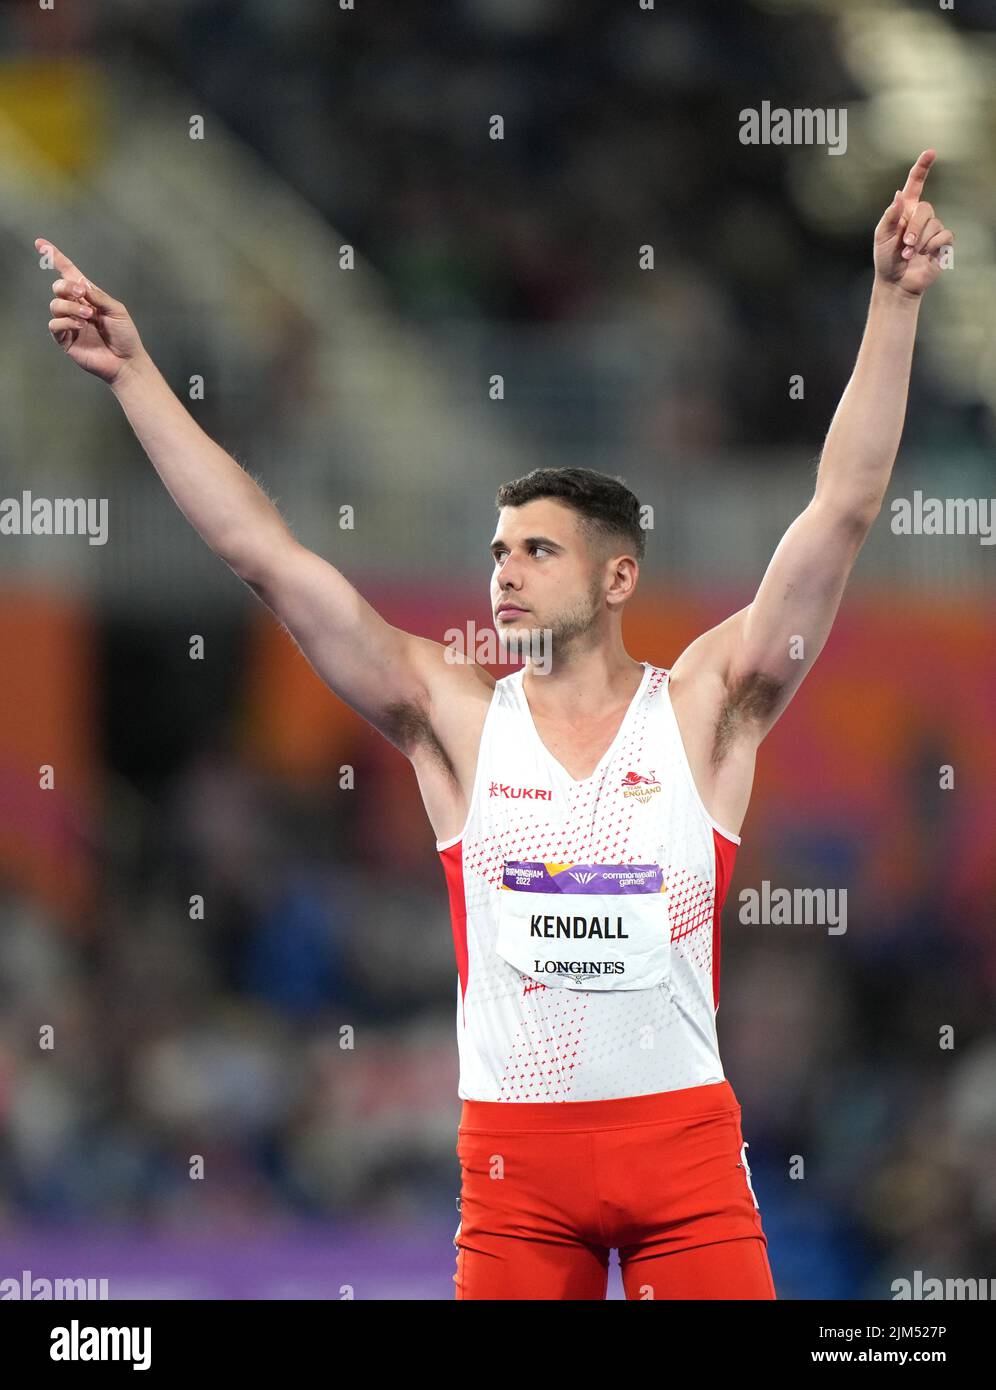 England's Harry Kendall acknowledges the crowd before the Men's Decathlon 400m at Alexander Stadium on day seven of the 2022 Commonwealth Games in Birmingham. Picture date: Thursday August 4, 2022. Stock Photo